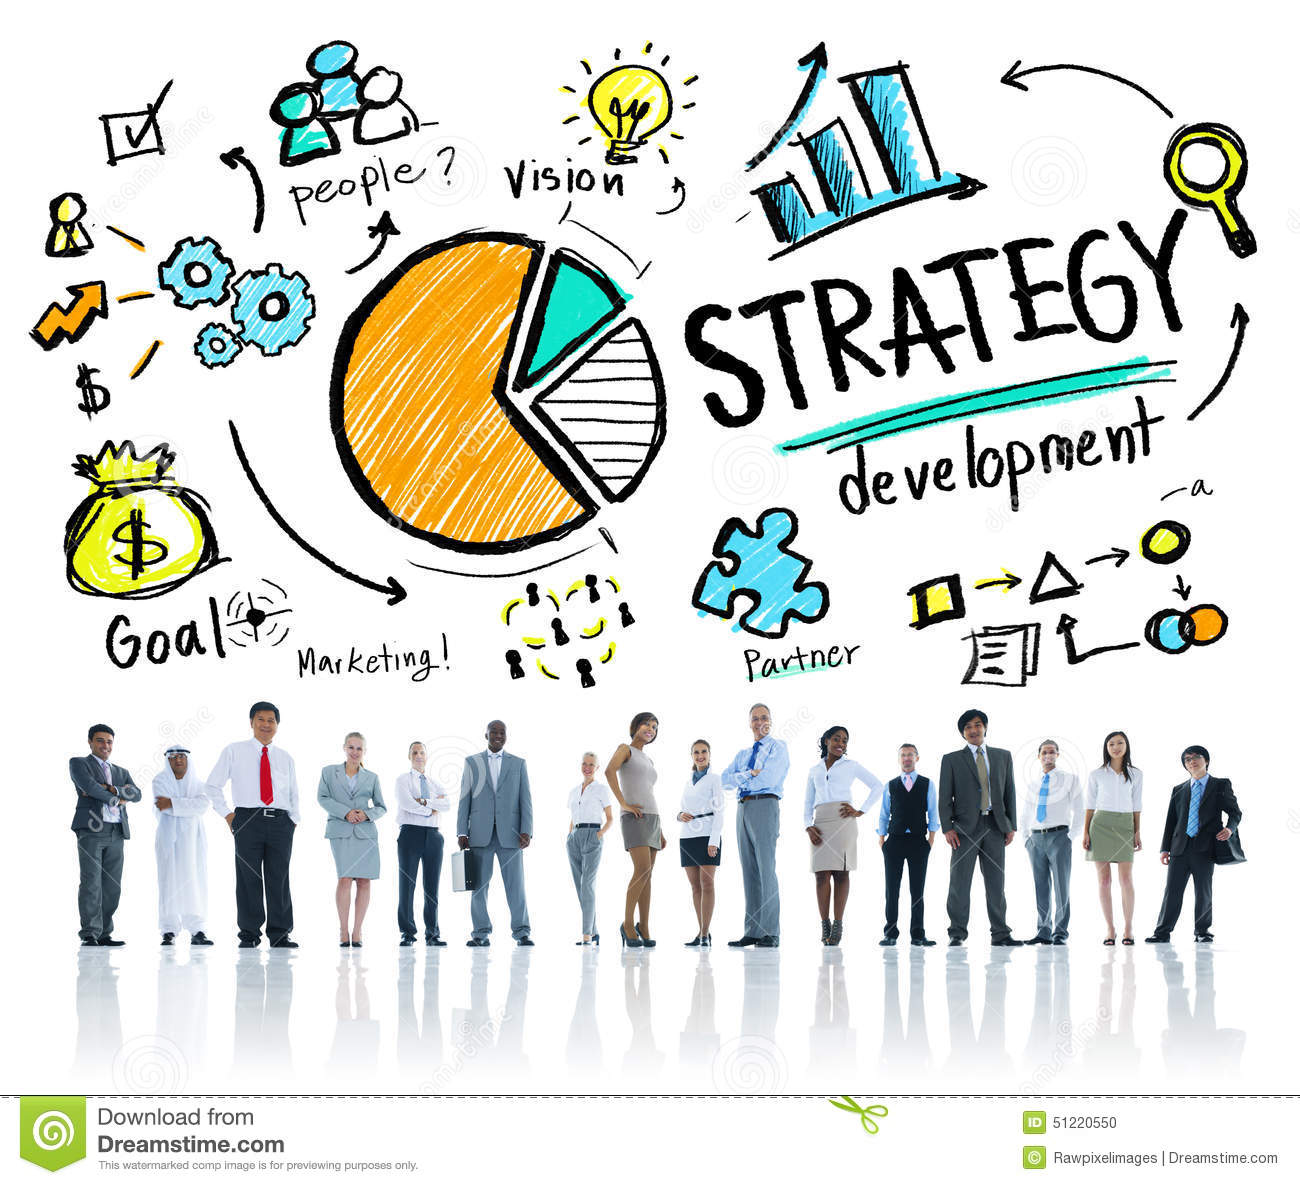 strategy-development-goal-marketing-vision-planning-business-concept-51220550